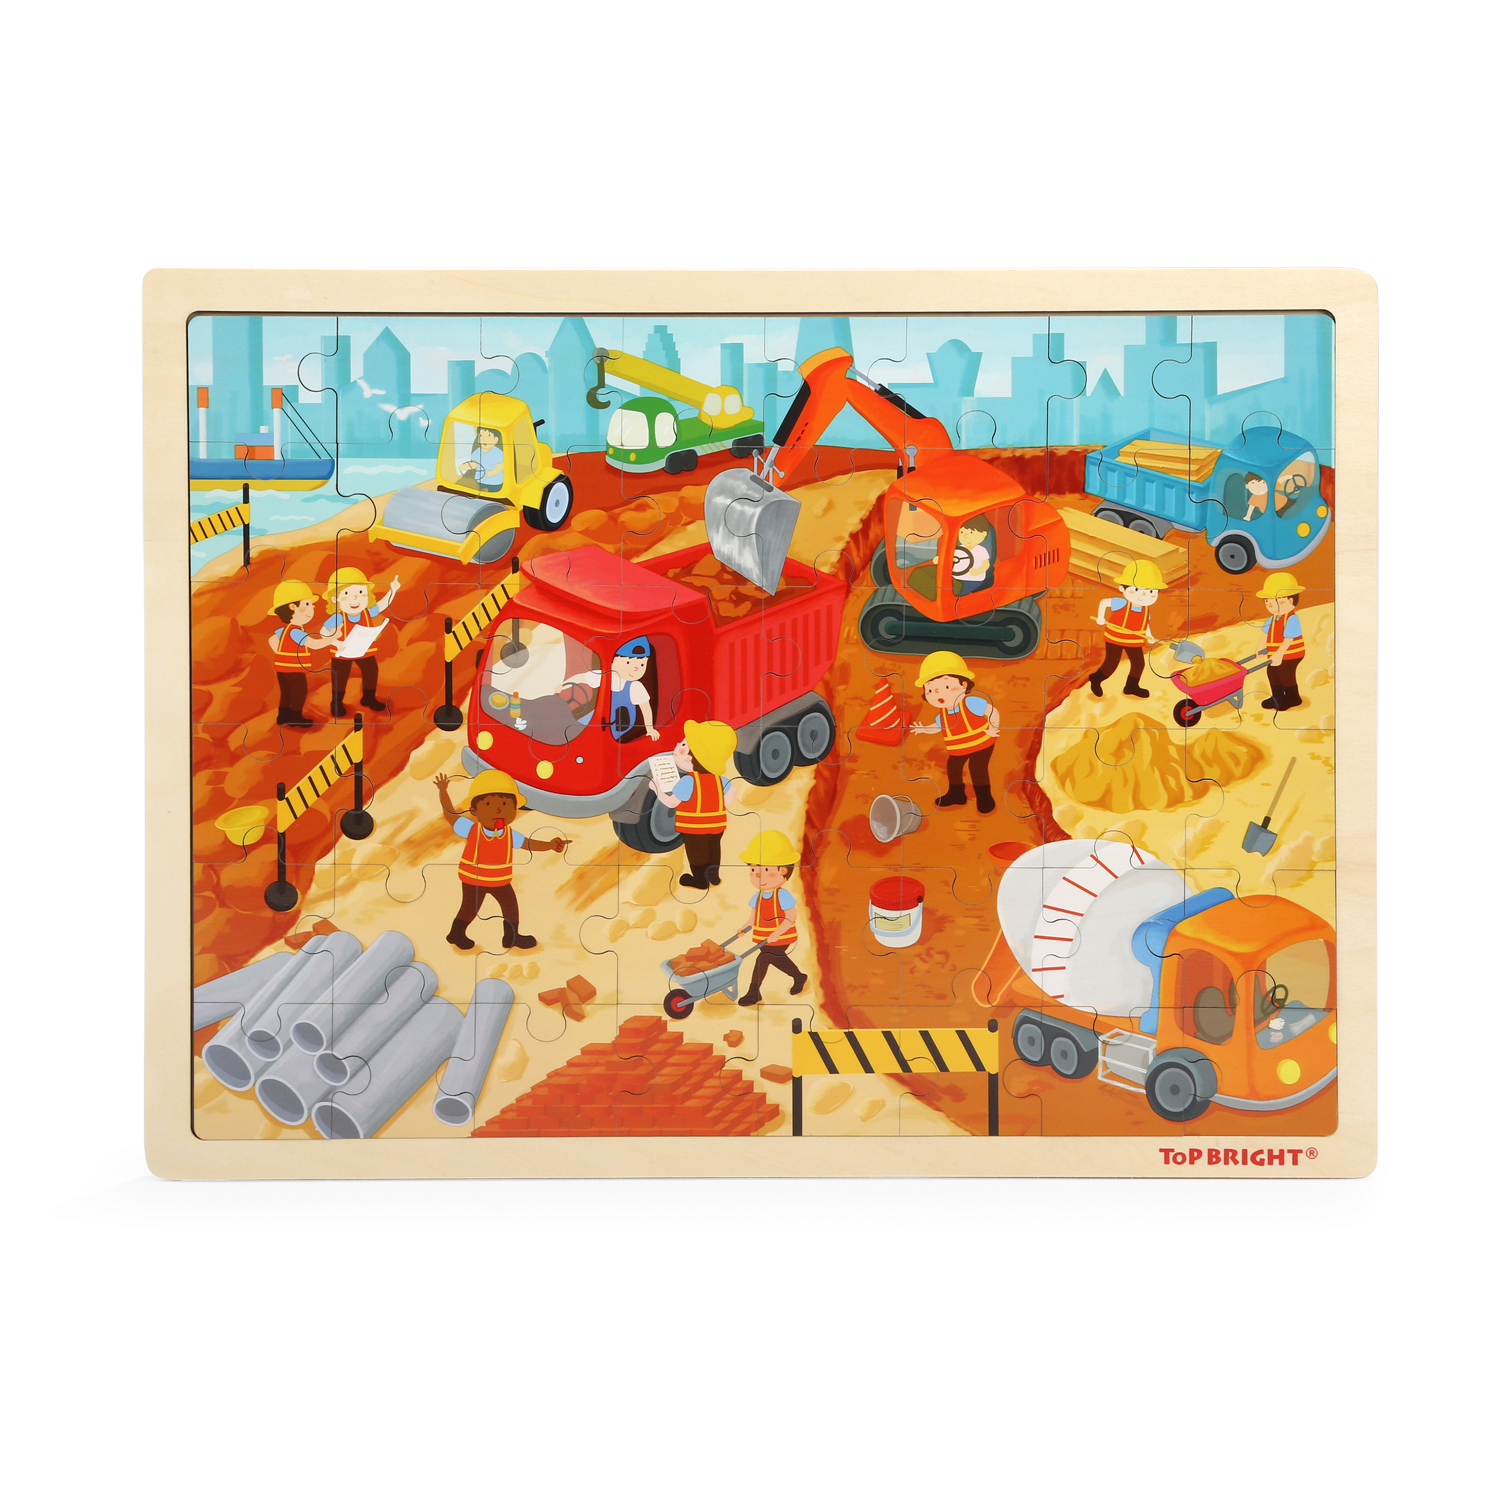 Top Bright 48 Piece Puzzles For Kids – Construction